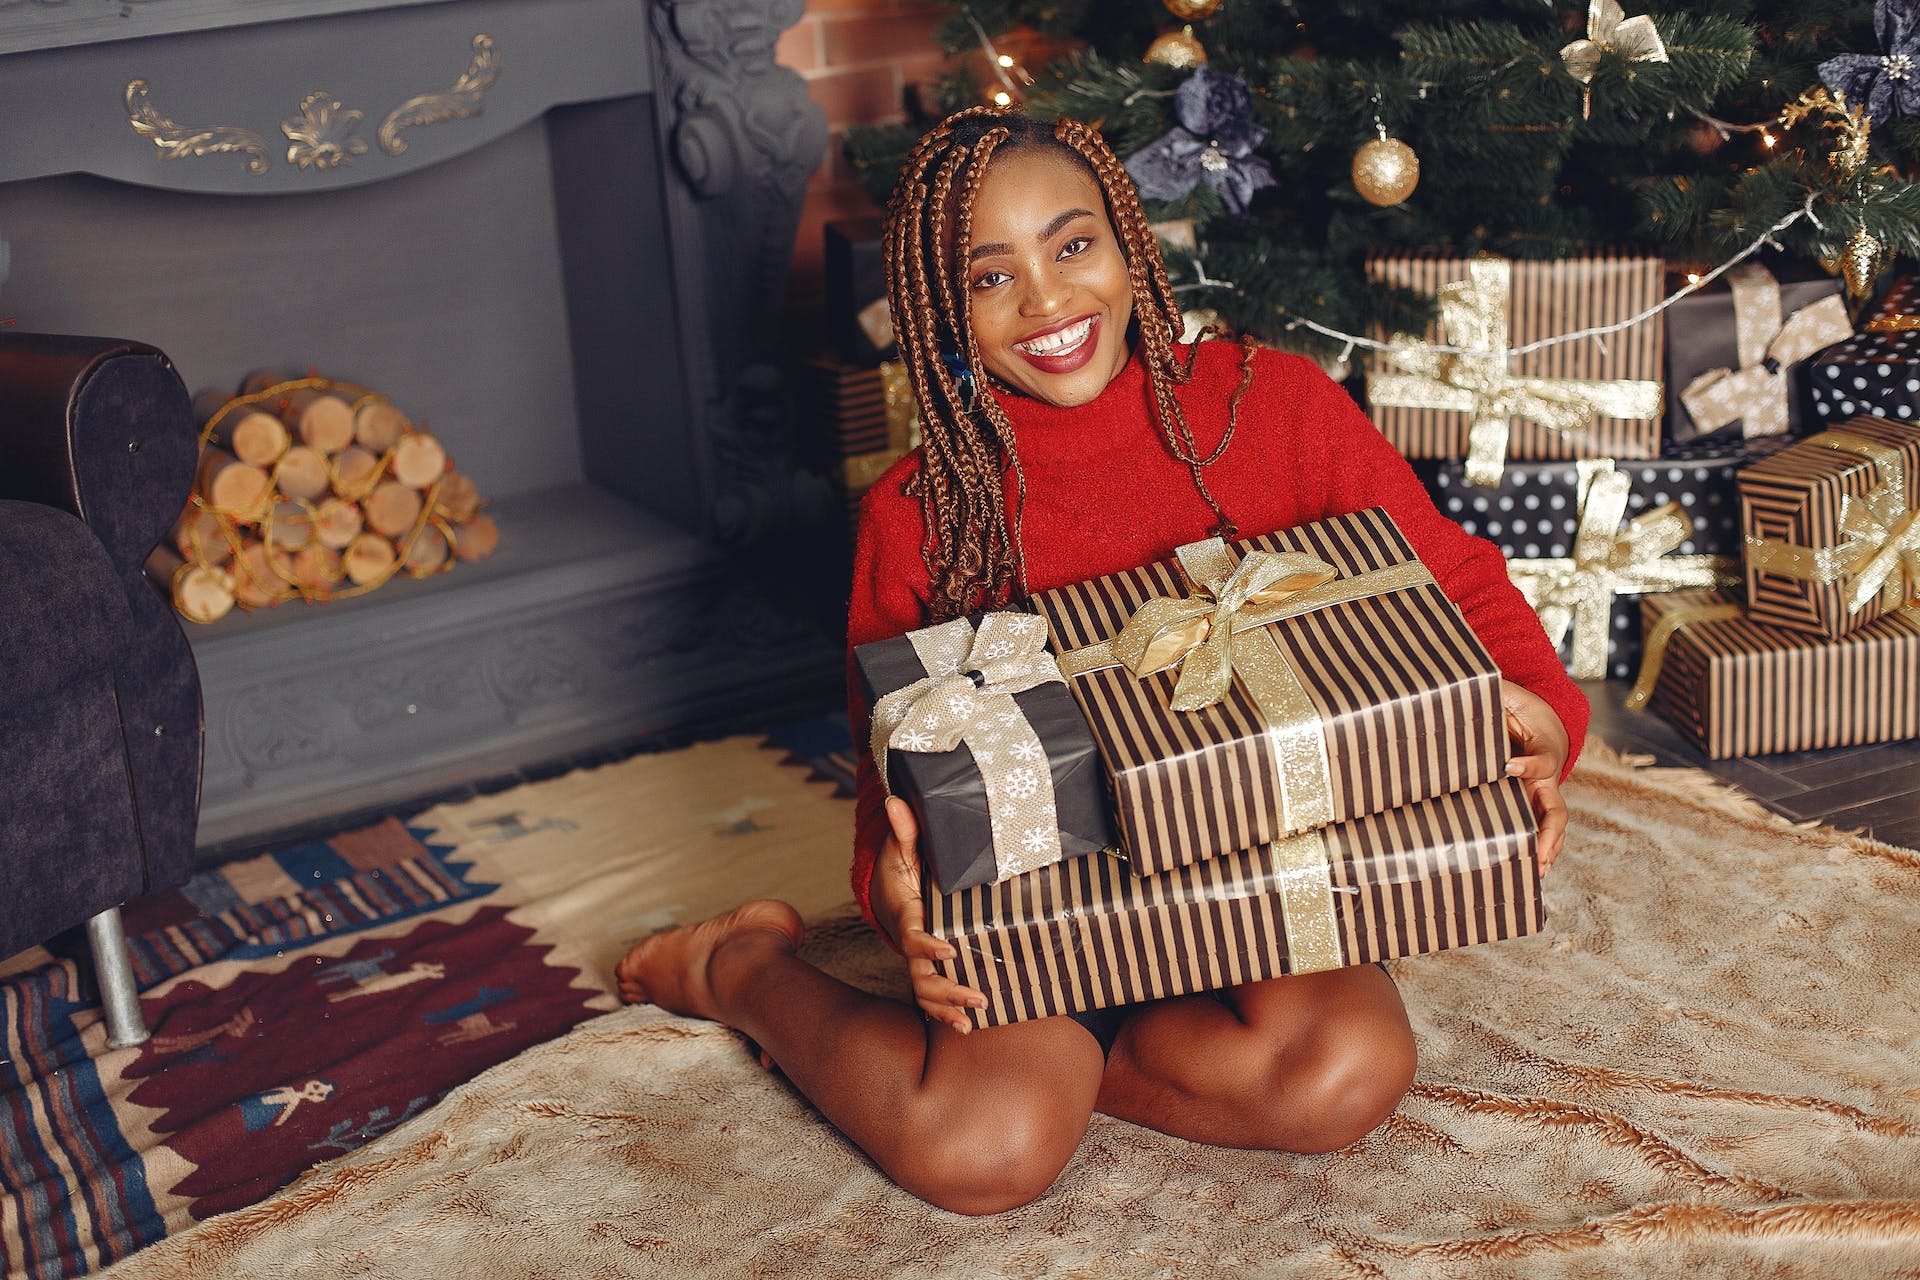 A smiling black woman holding gift boxes | Source: Pexels